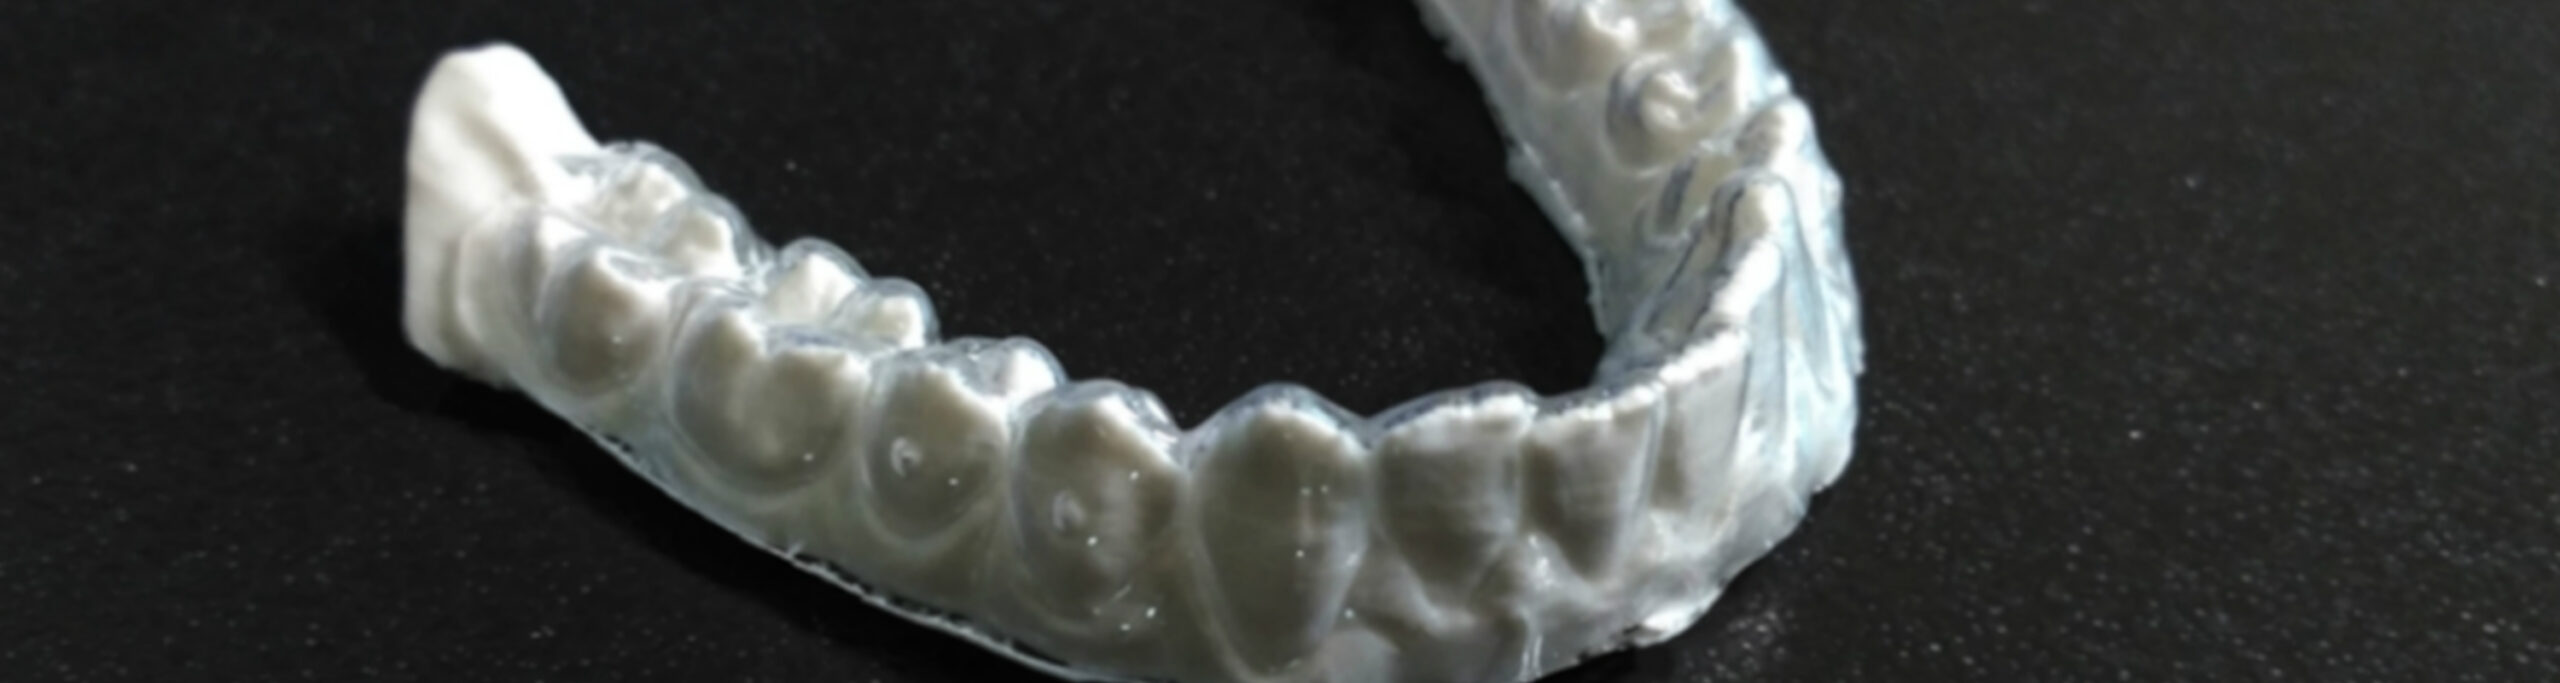 Faster, more accurate dental models 1